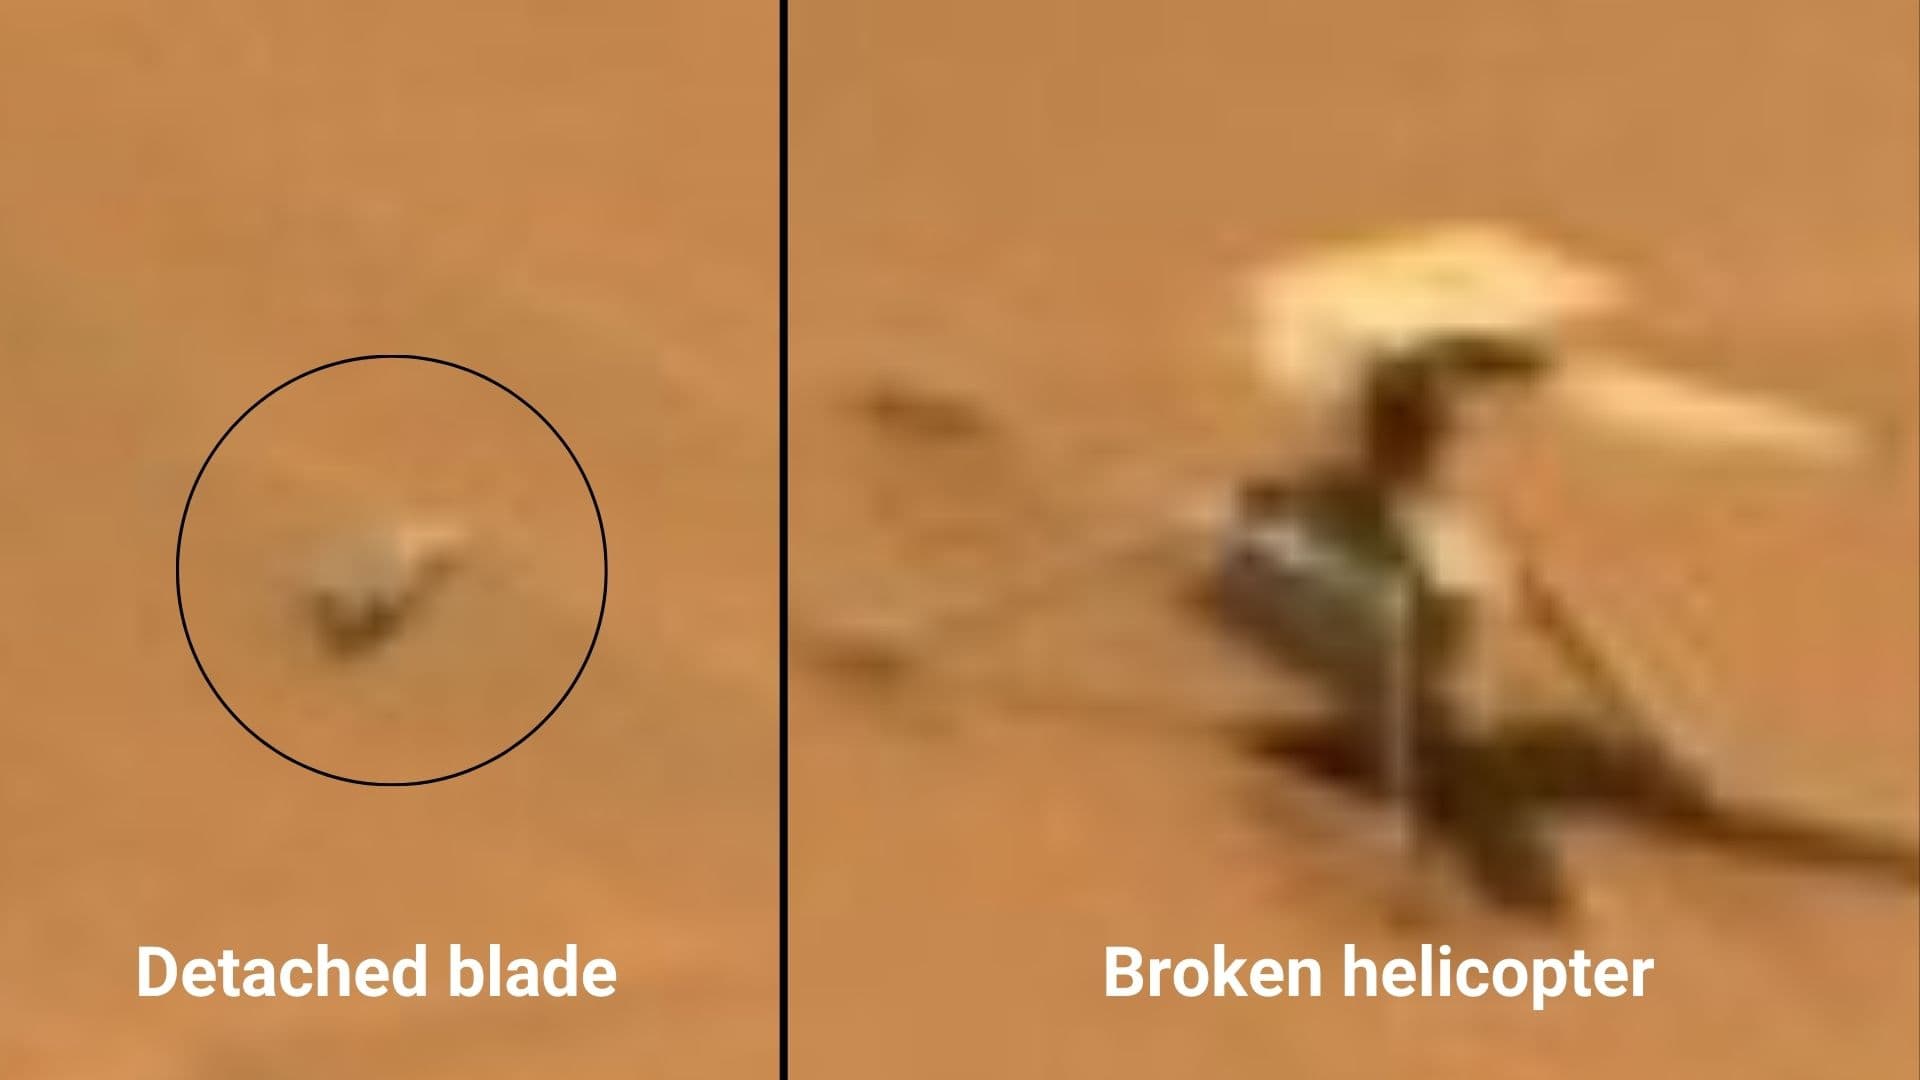 Zoomed image of the broken Ingenuity helicopter and its detached rotor blade